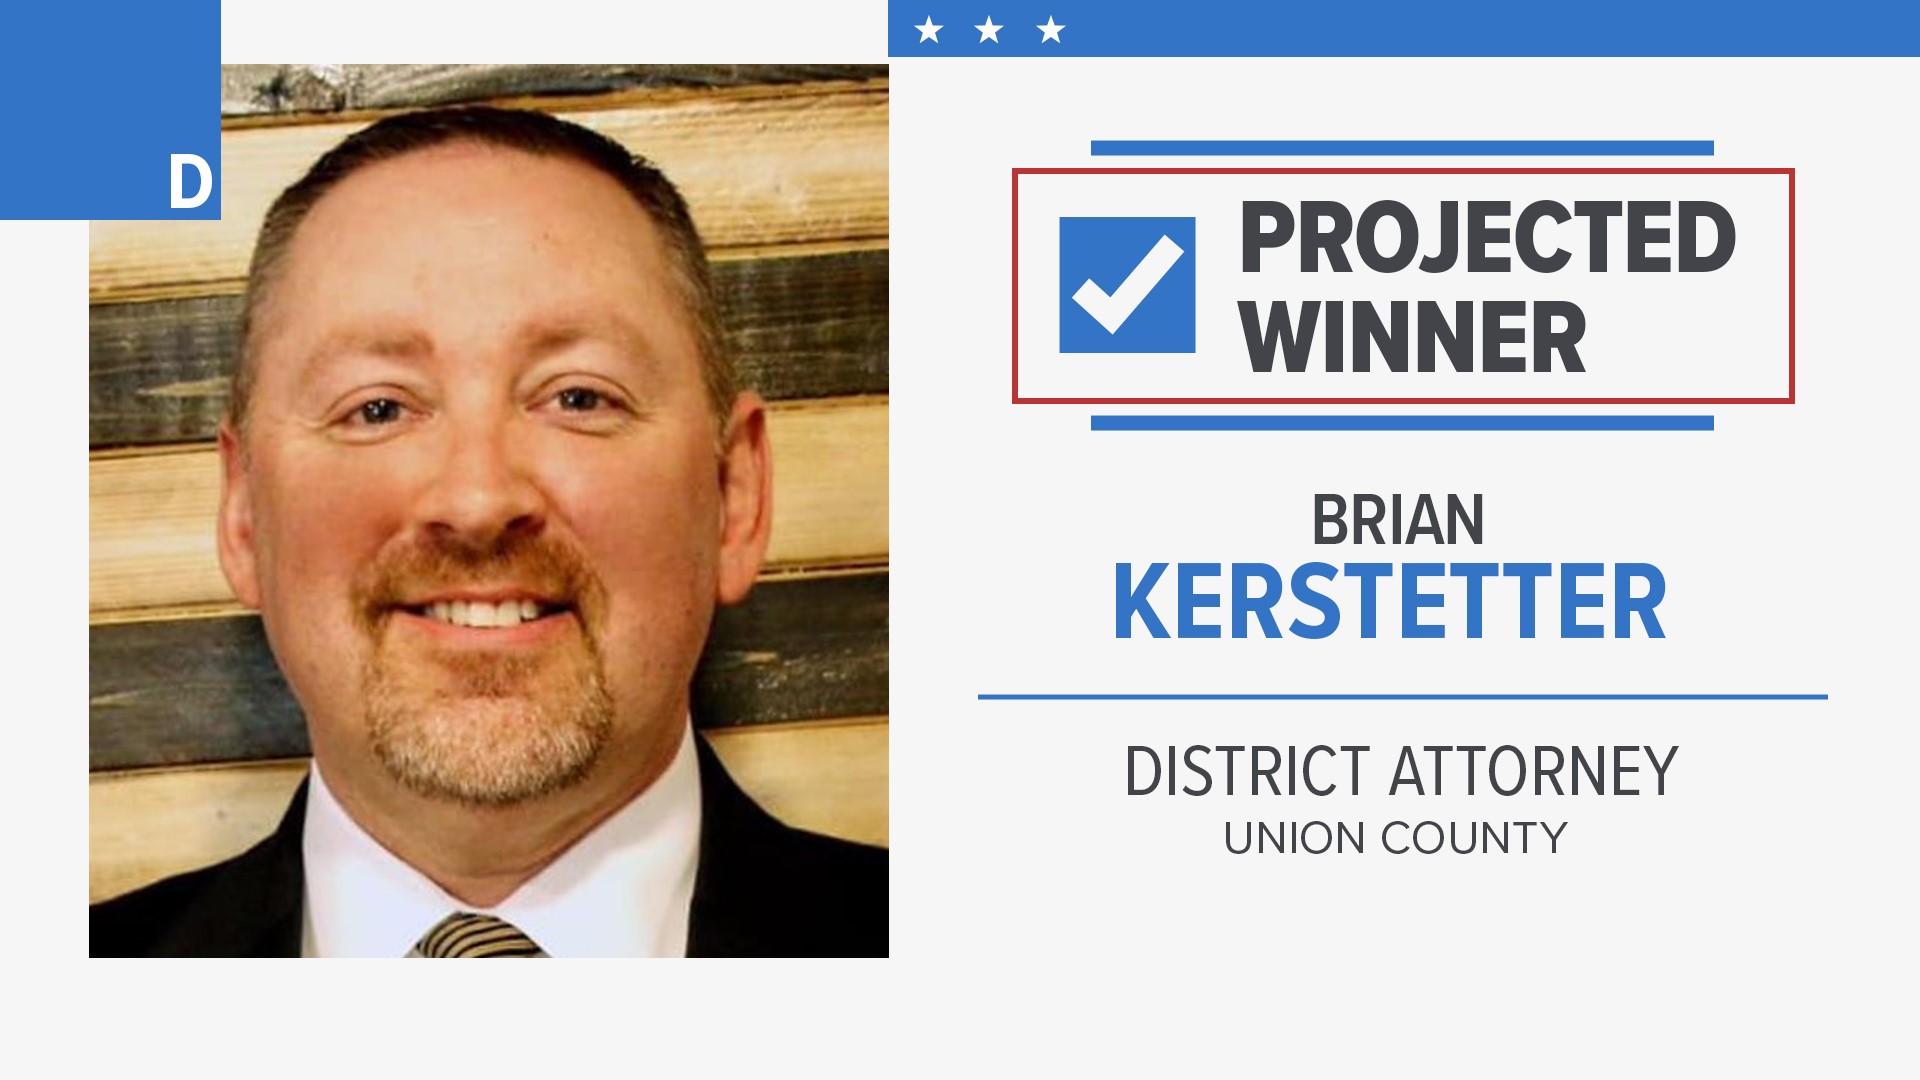 Brian Kerstetter is projected to be Union County's first new district attorney in 30 years.